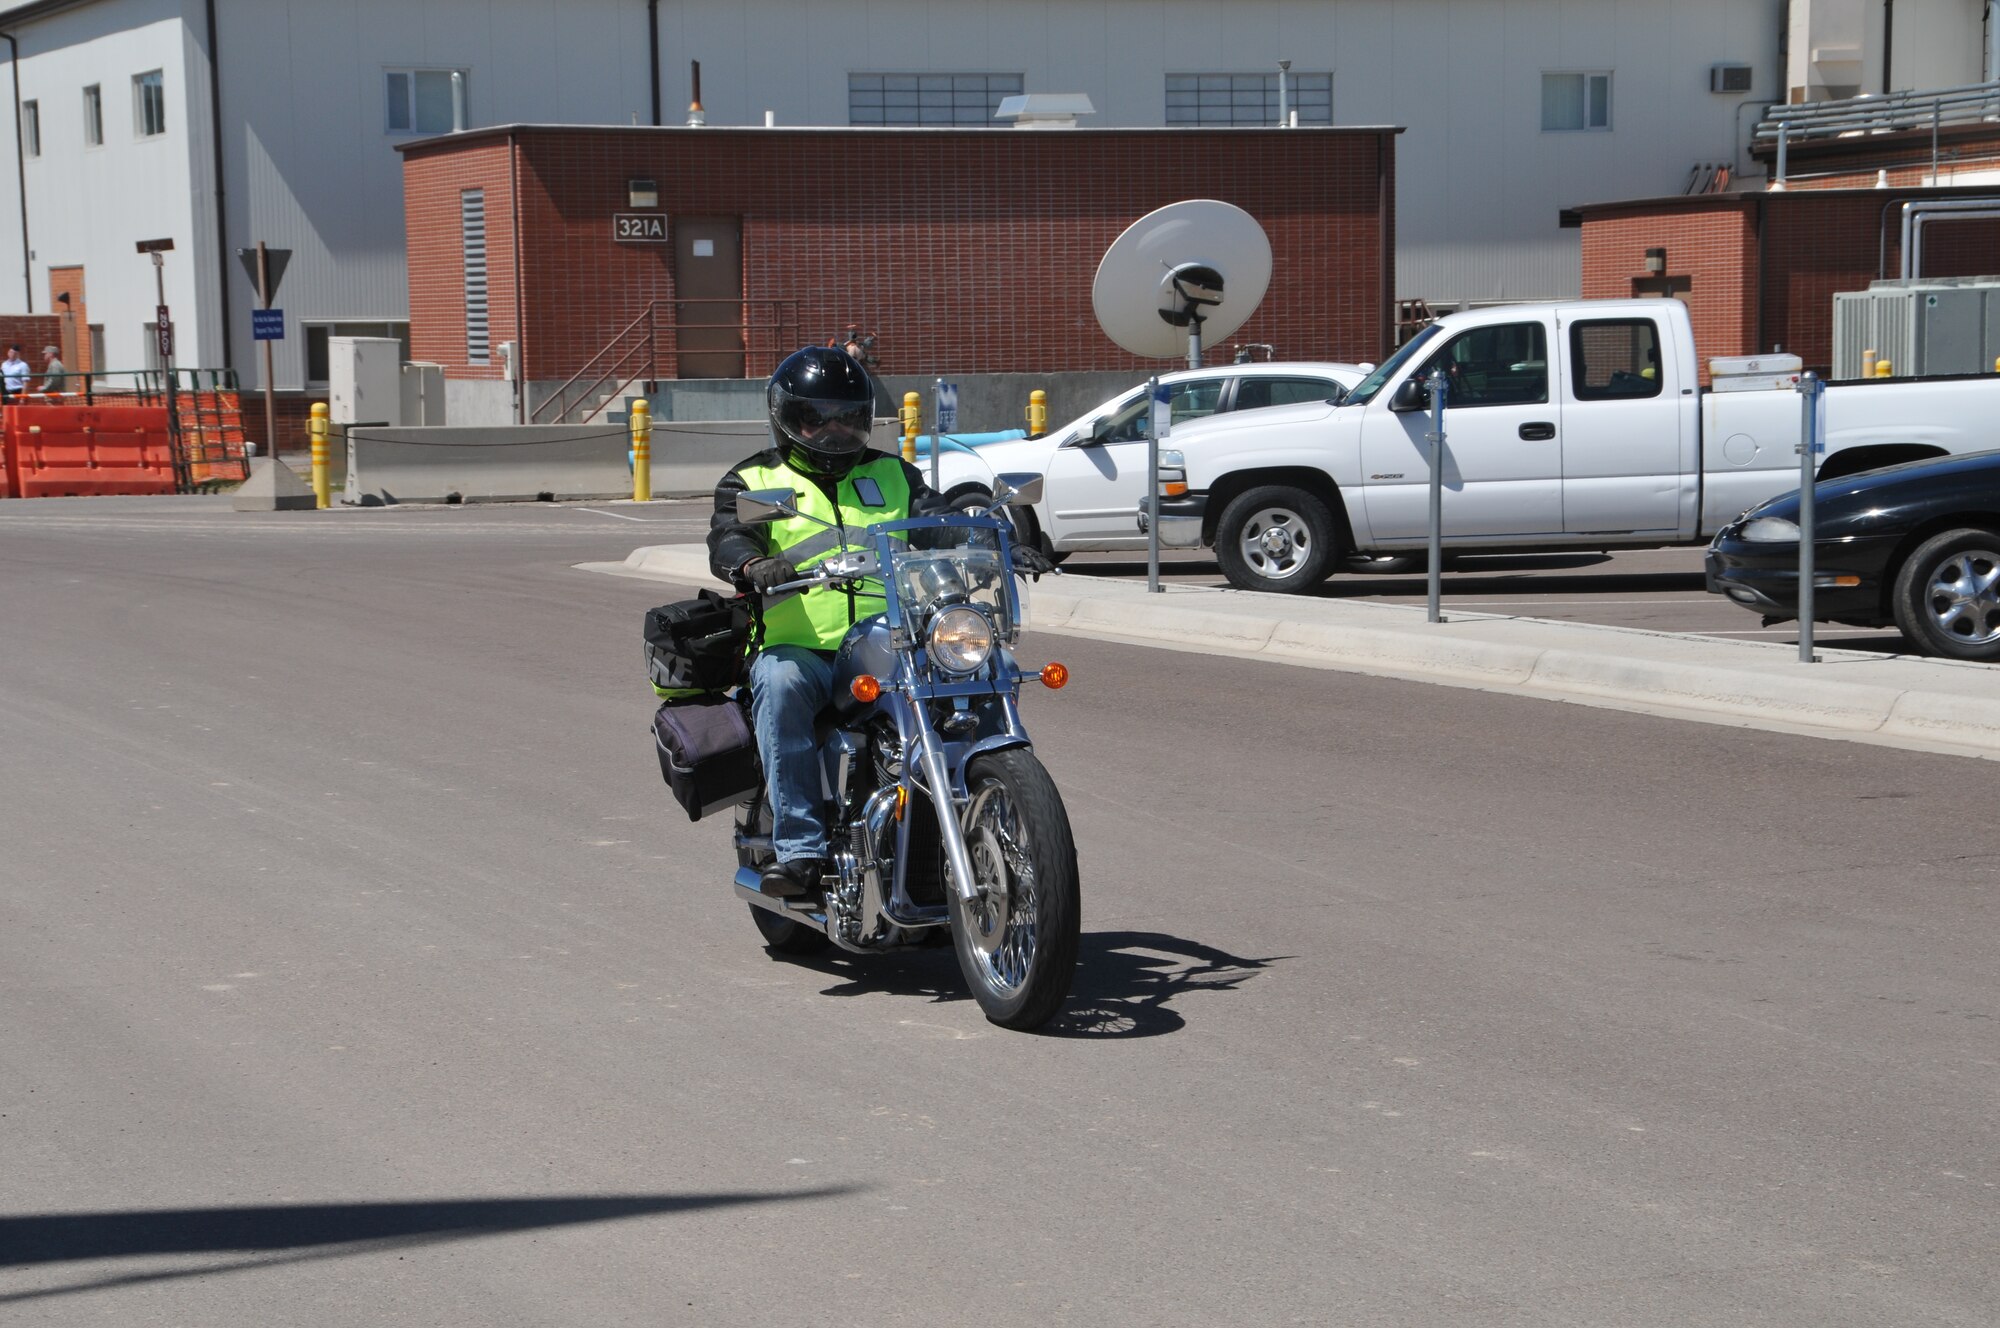 120th Airlift Wing Master Sgt. Winston Wilbur demonstrates the correct use of personal protective equipment as he rides his motorcycle home from work May 21, 2015, at Great Falls, Mont. (U.S. Air National Guard photo/Senior Master Sgt. Eric Peterson)